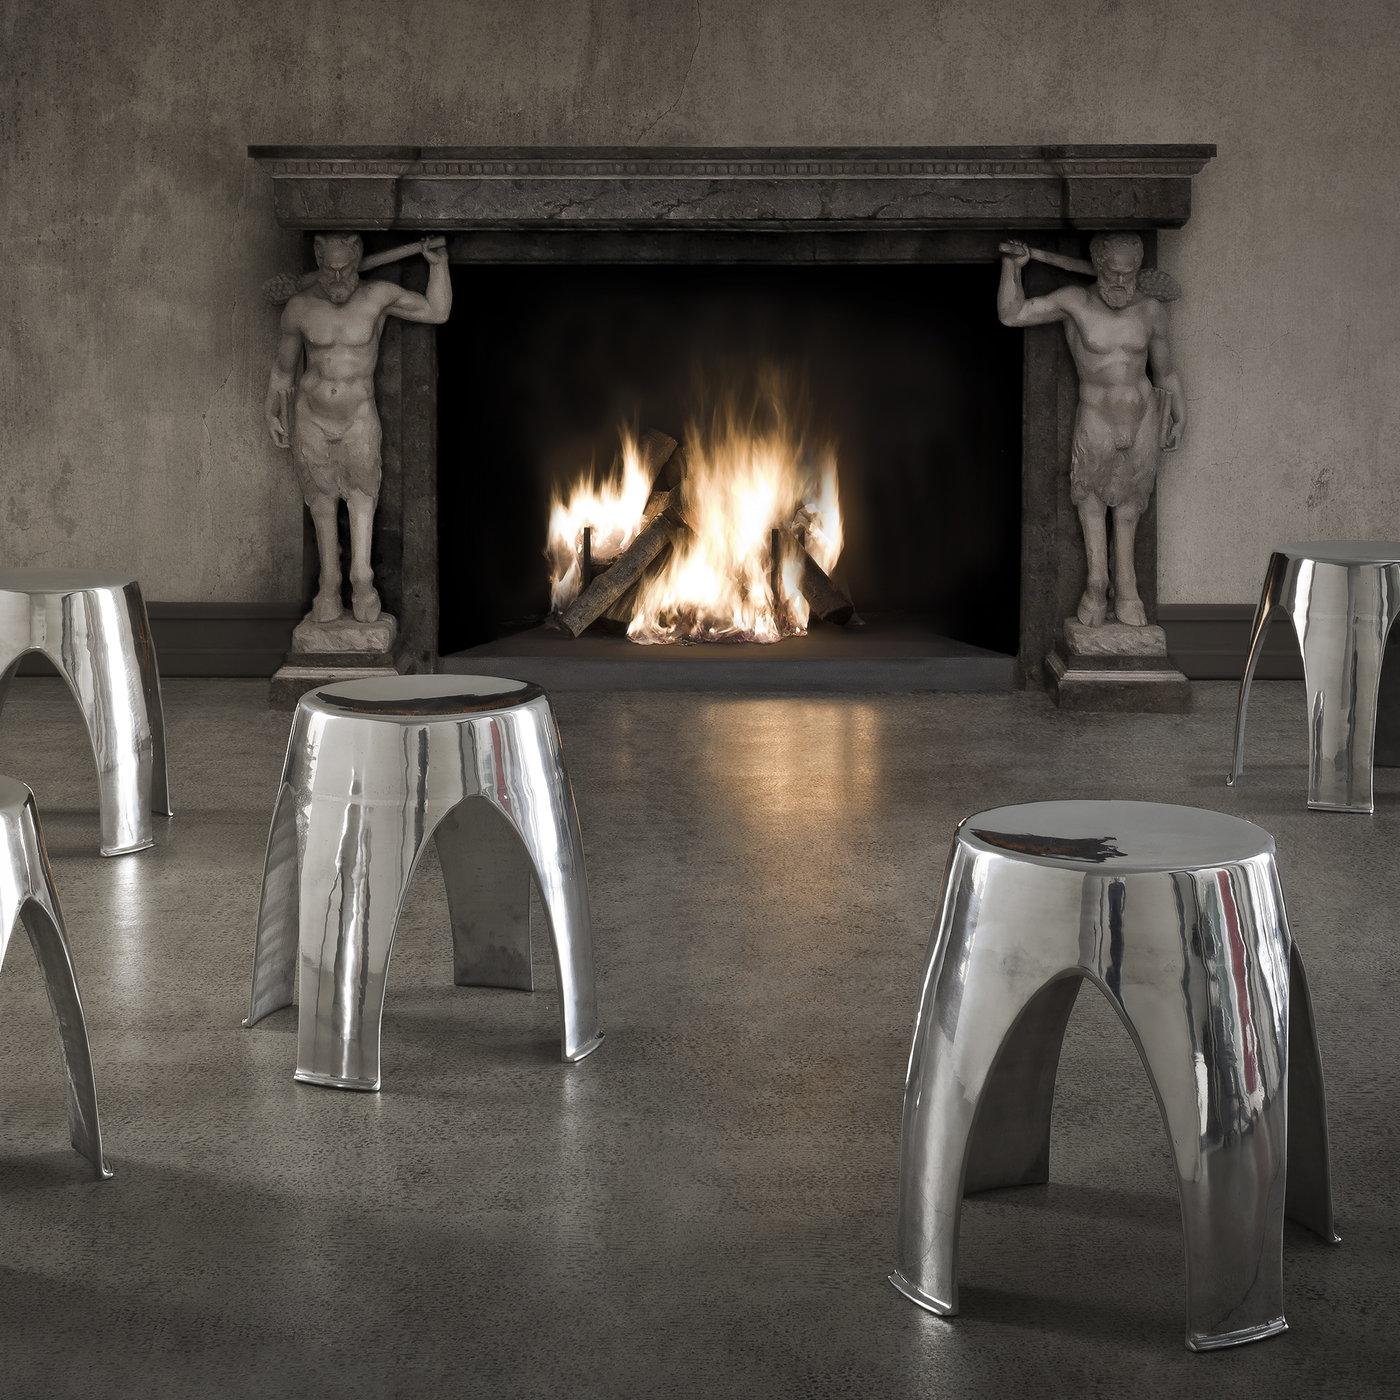 As water flows and transforms into ice, metal similarly transforms into furniture to form this striking aluminum-cast stool. Resembling the whimsical shape of igloos, this stool effortlessly blend functionality with modern minimalist aesthetic.